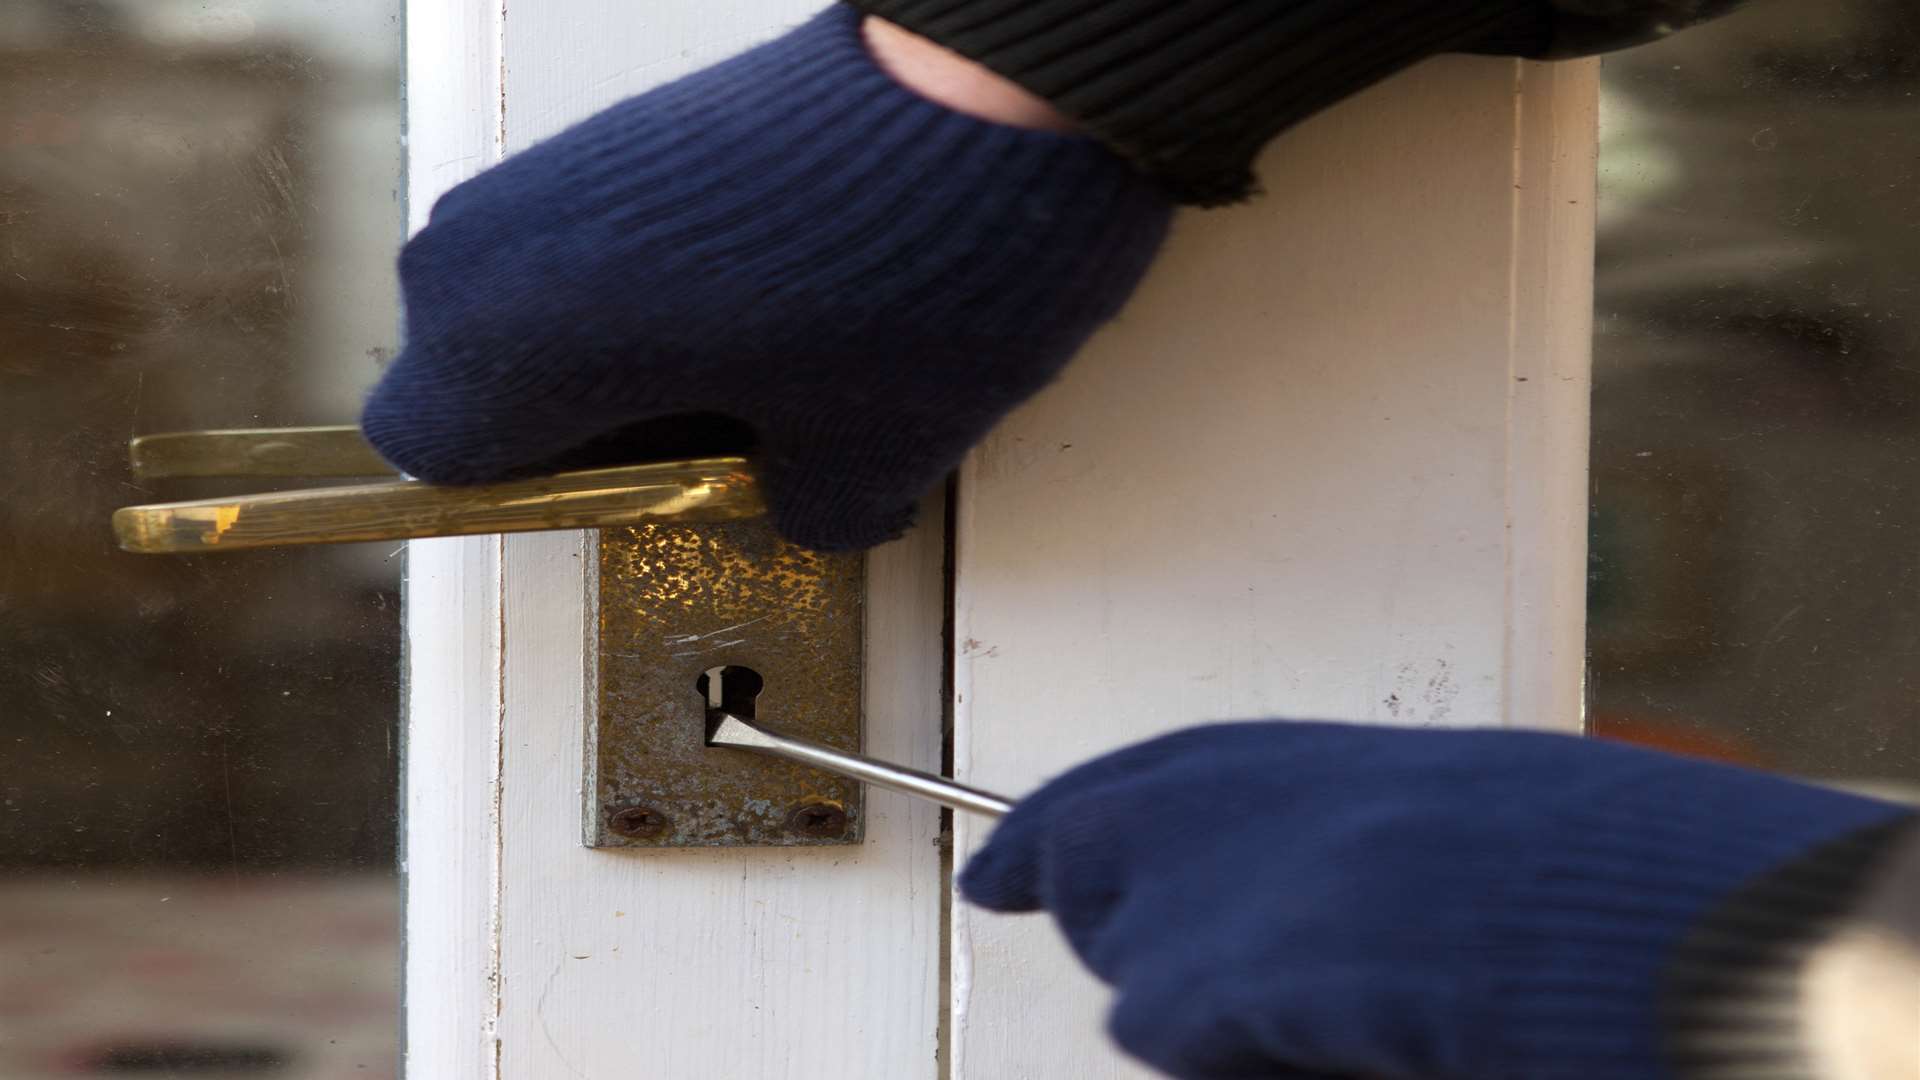 A man has been arrested after several burglaries in Canterbury